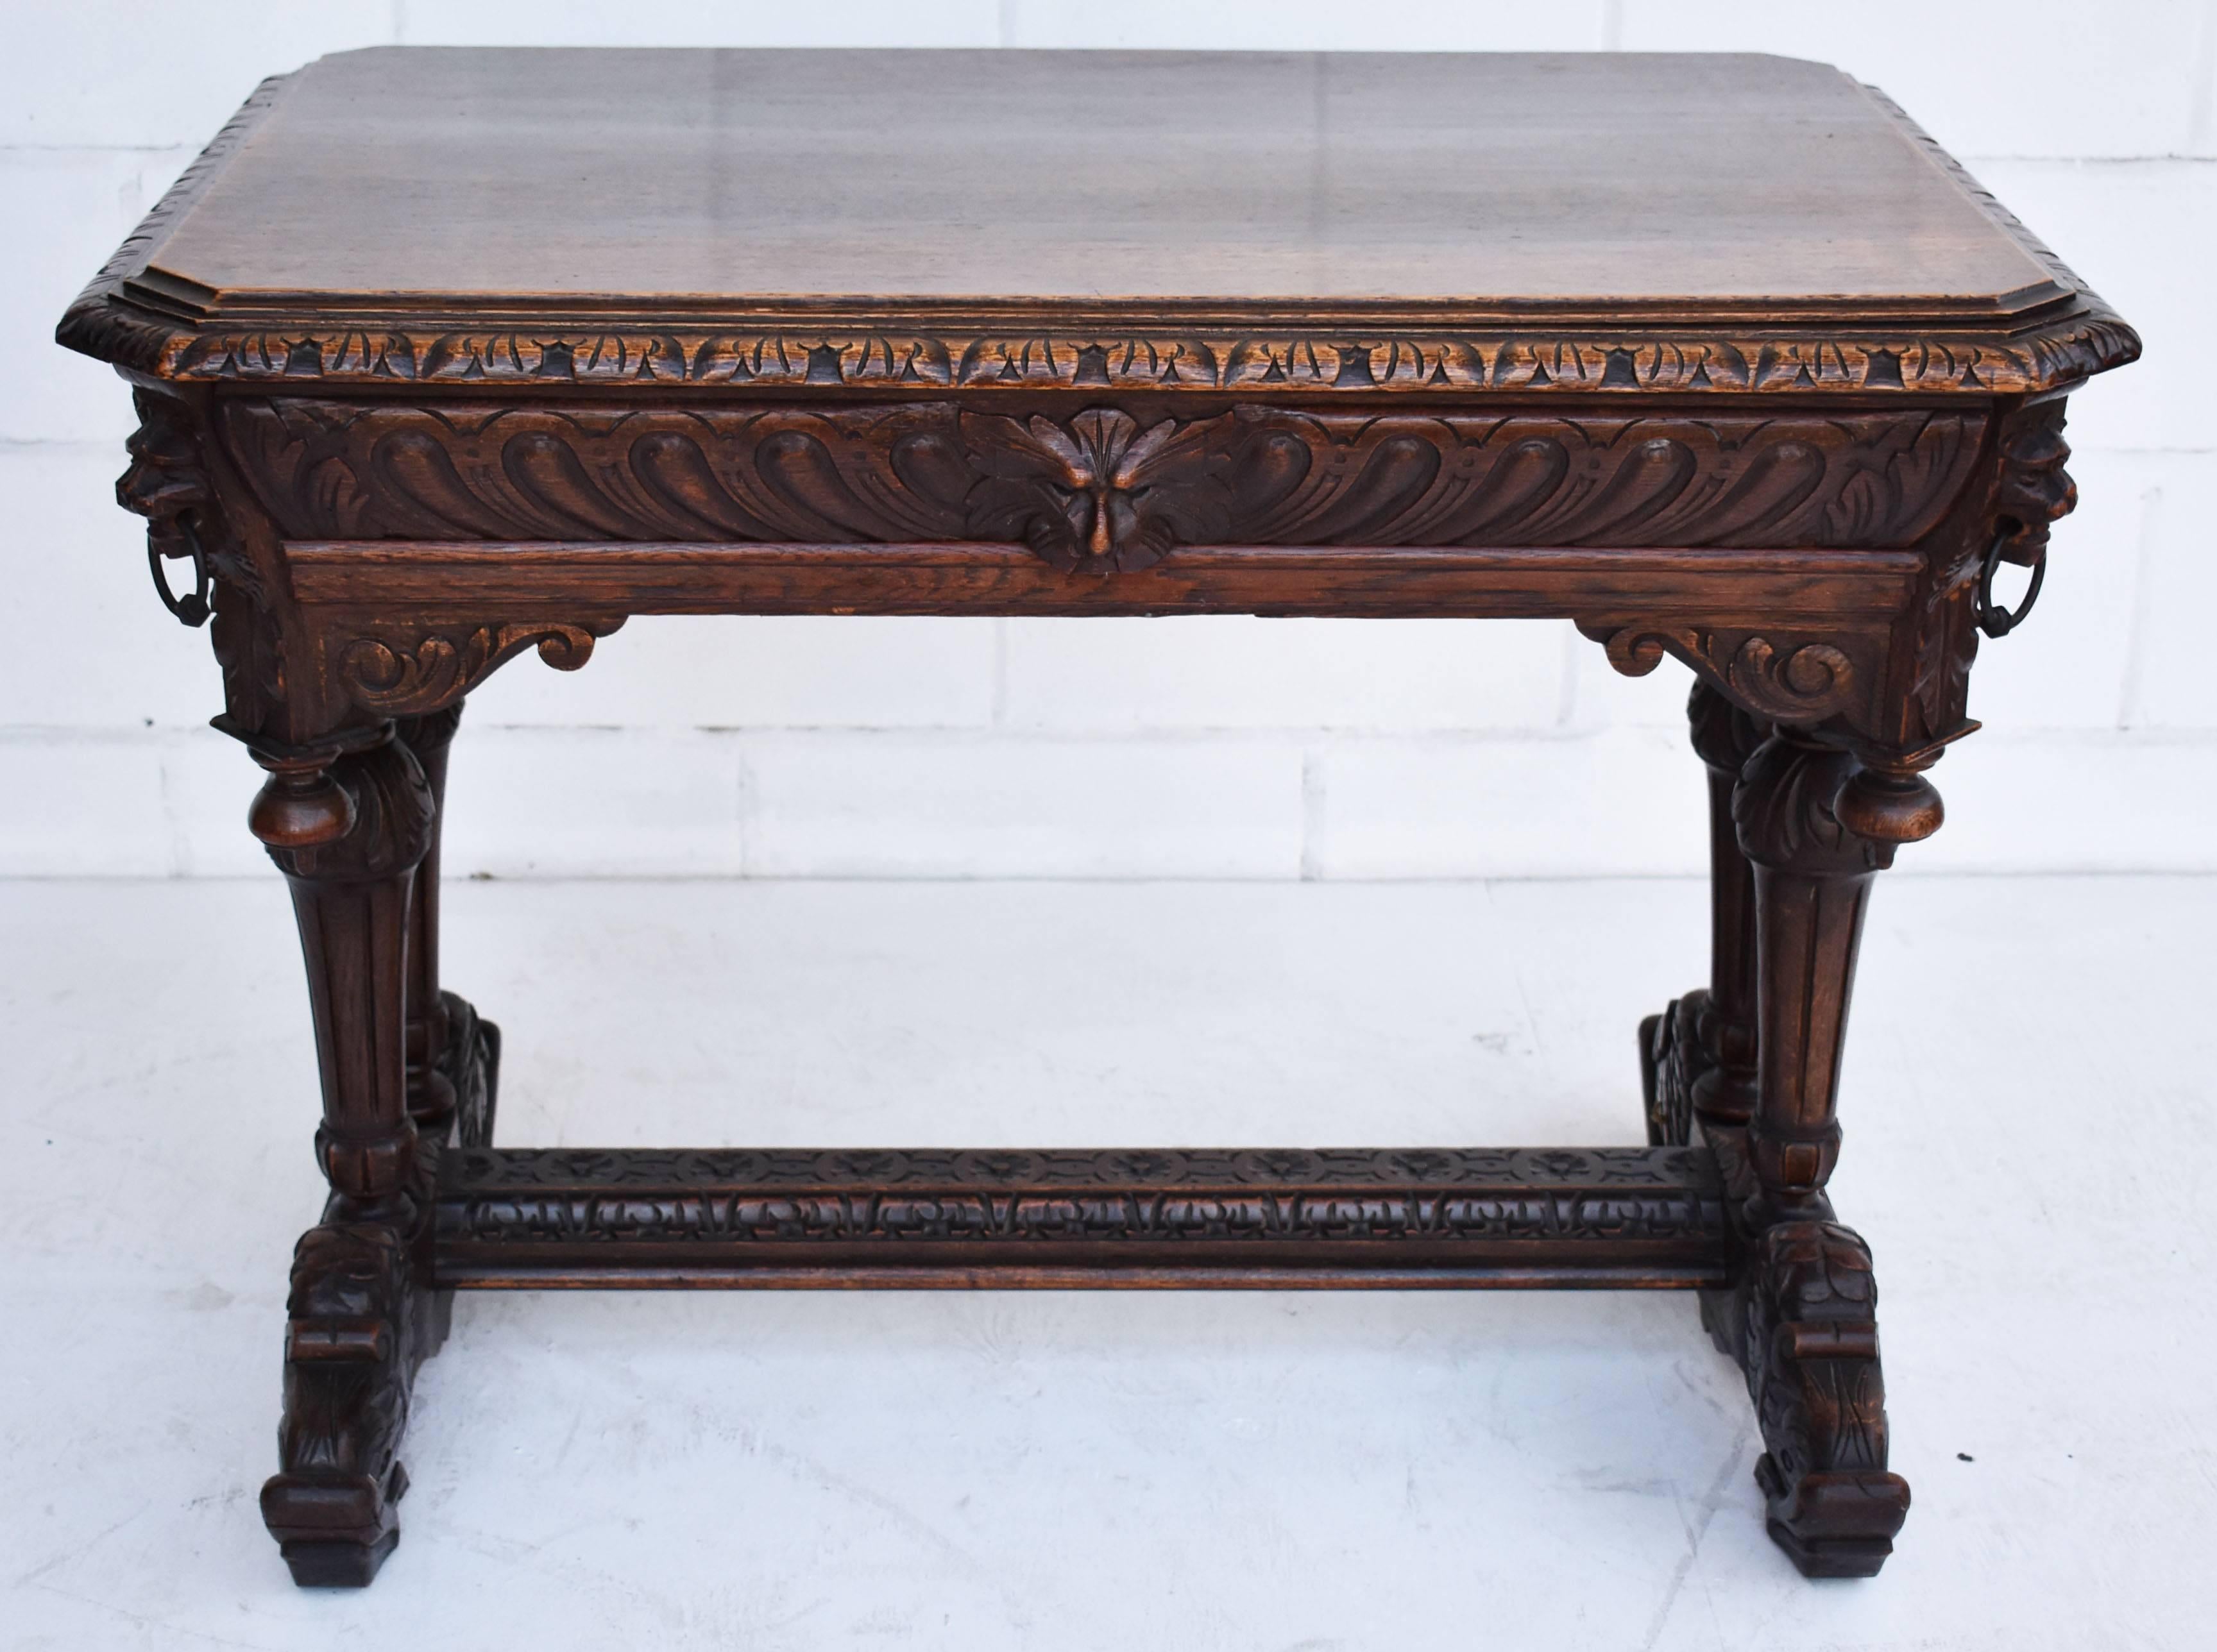 For sale is a good quality Victorian solid oak carved centre table. The table has intricately carved lion masks on each corner, with ornate carvings on each frieze, above shaped and carved legs united by a central carved stretcher, standing on